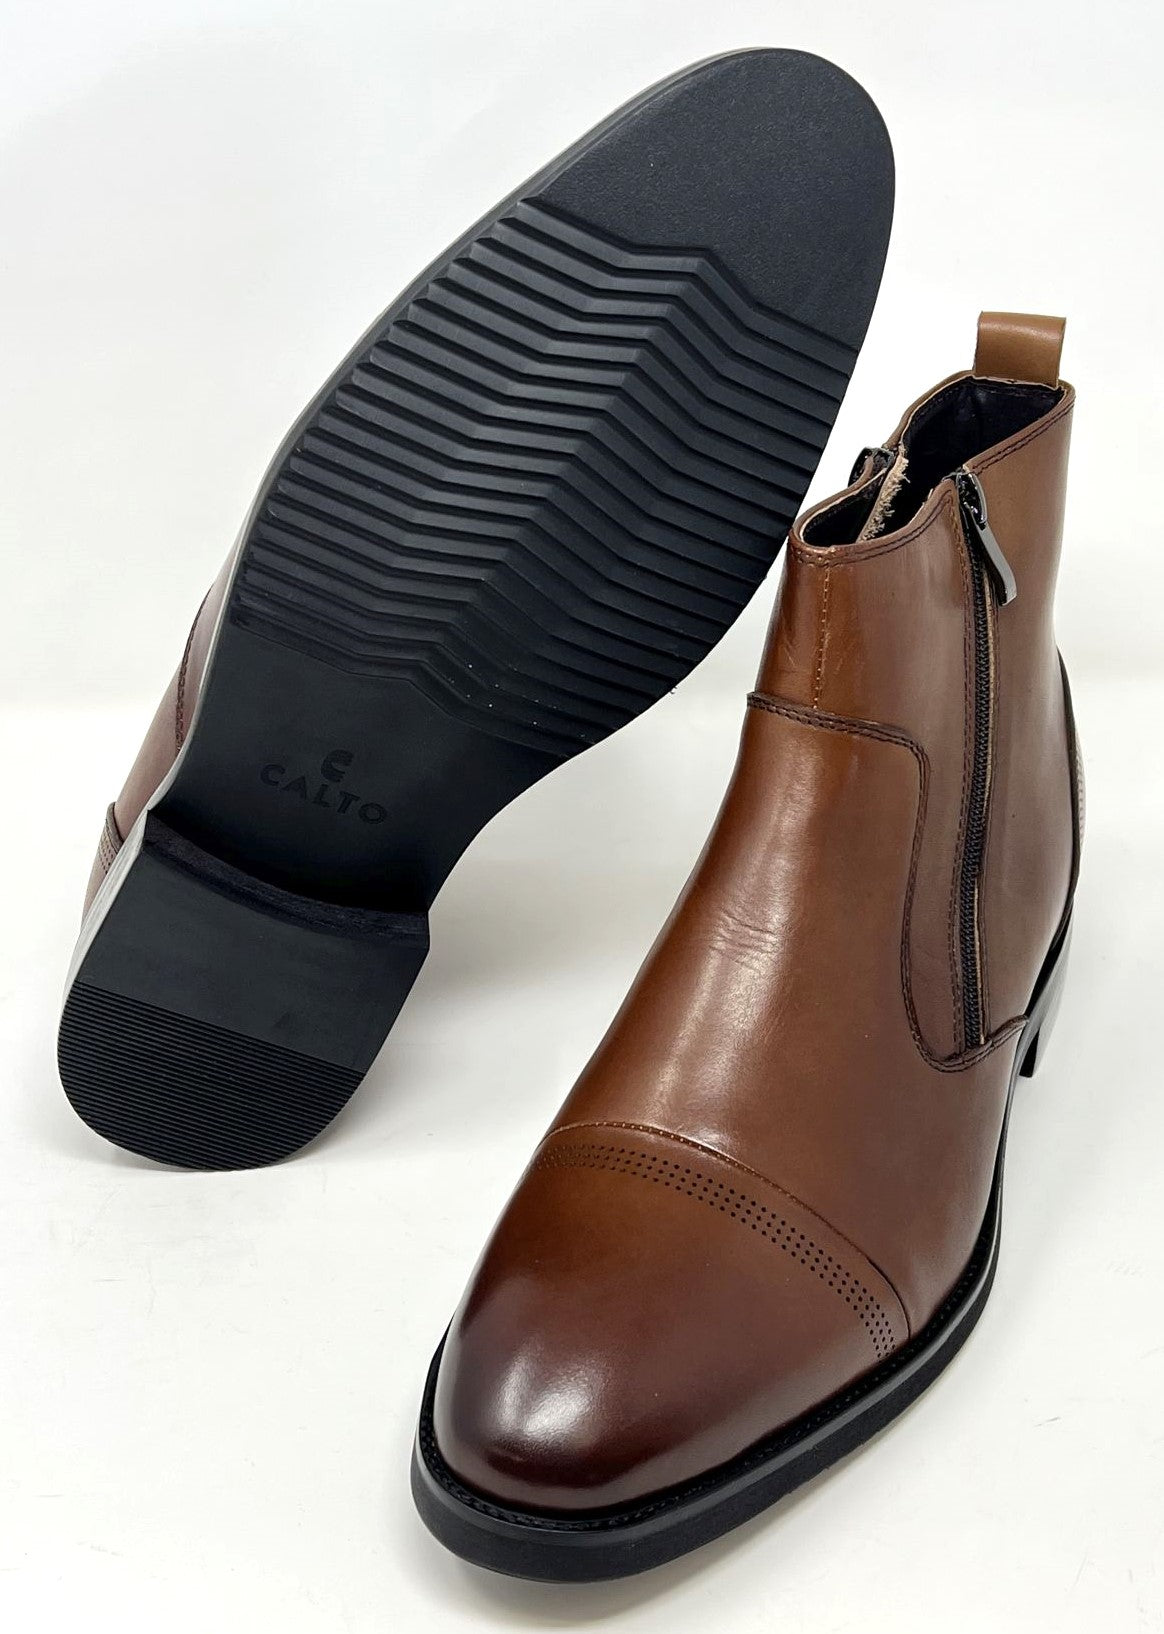 FSK0109 - 2.8 Inches Taller (Brown) - Size 9 Only